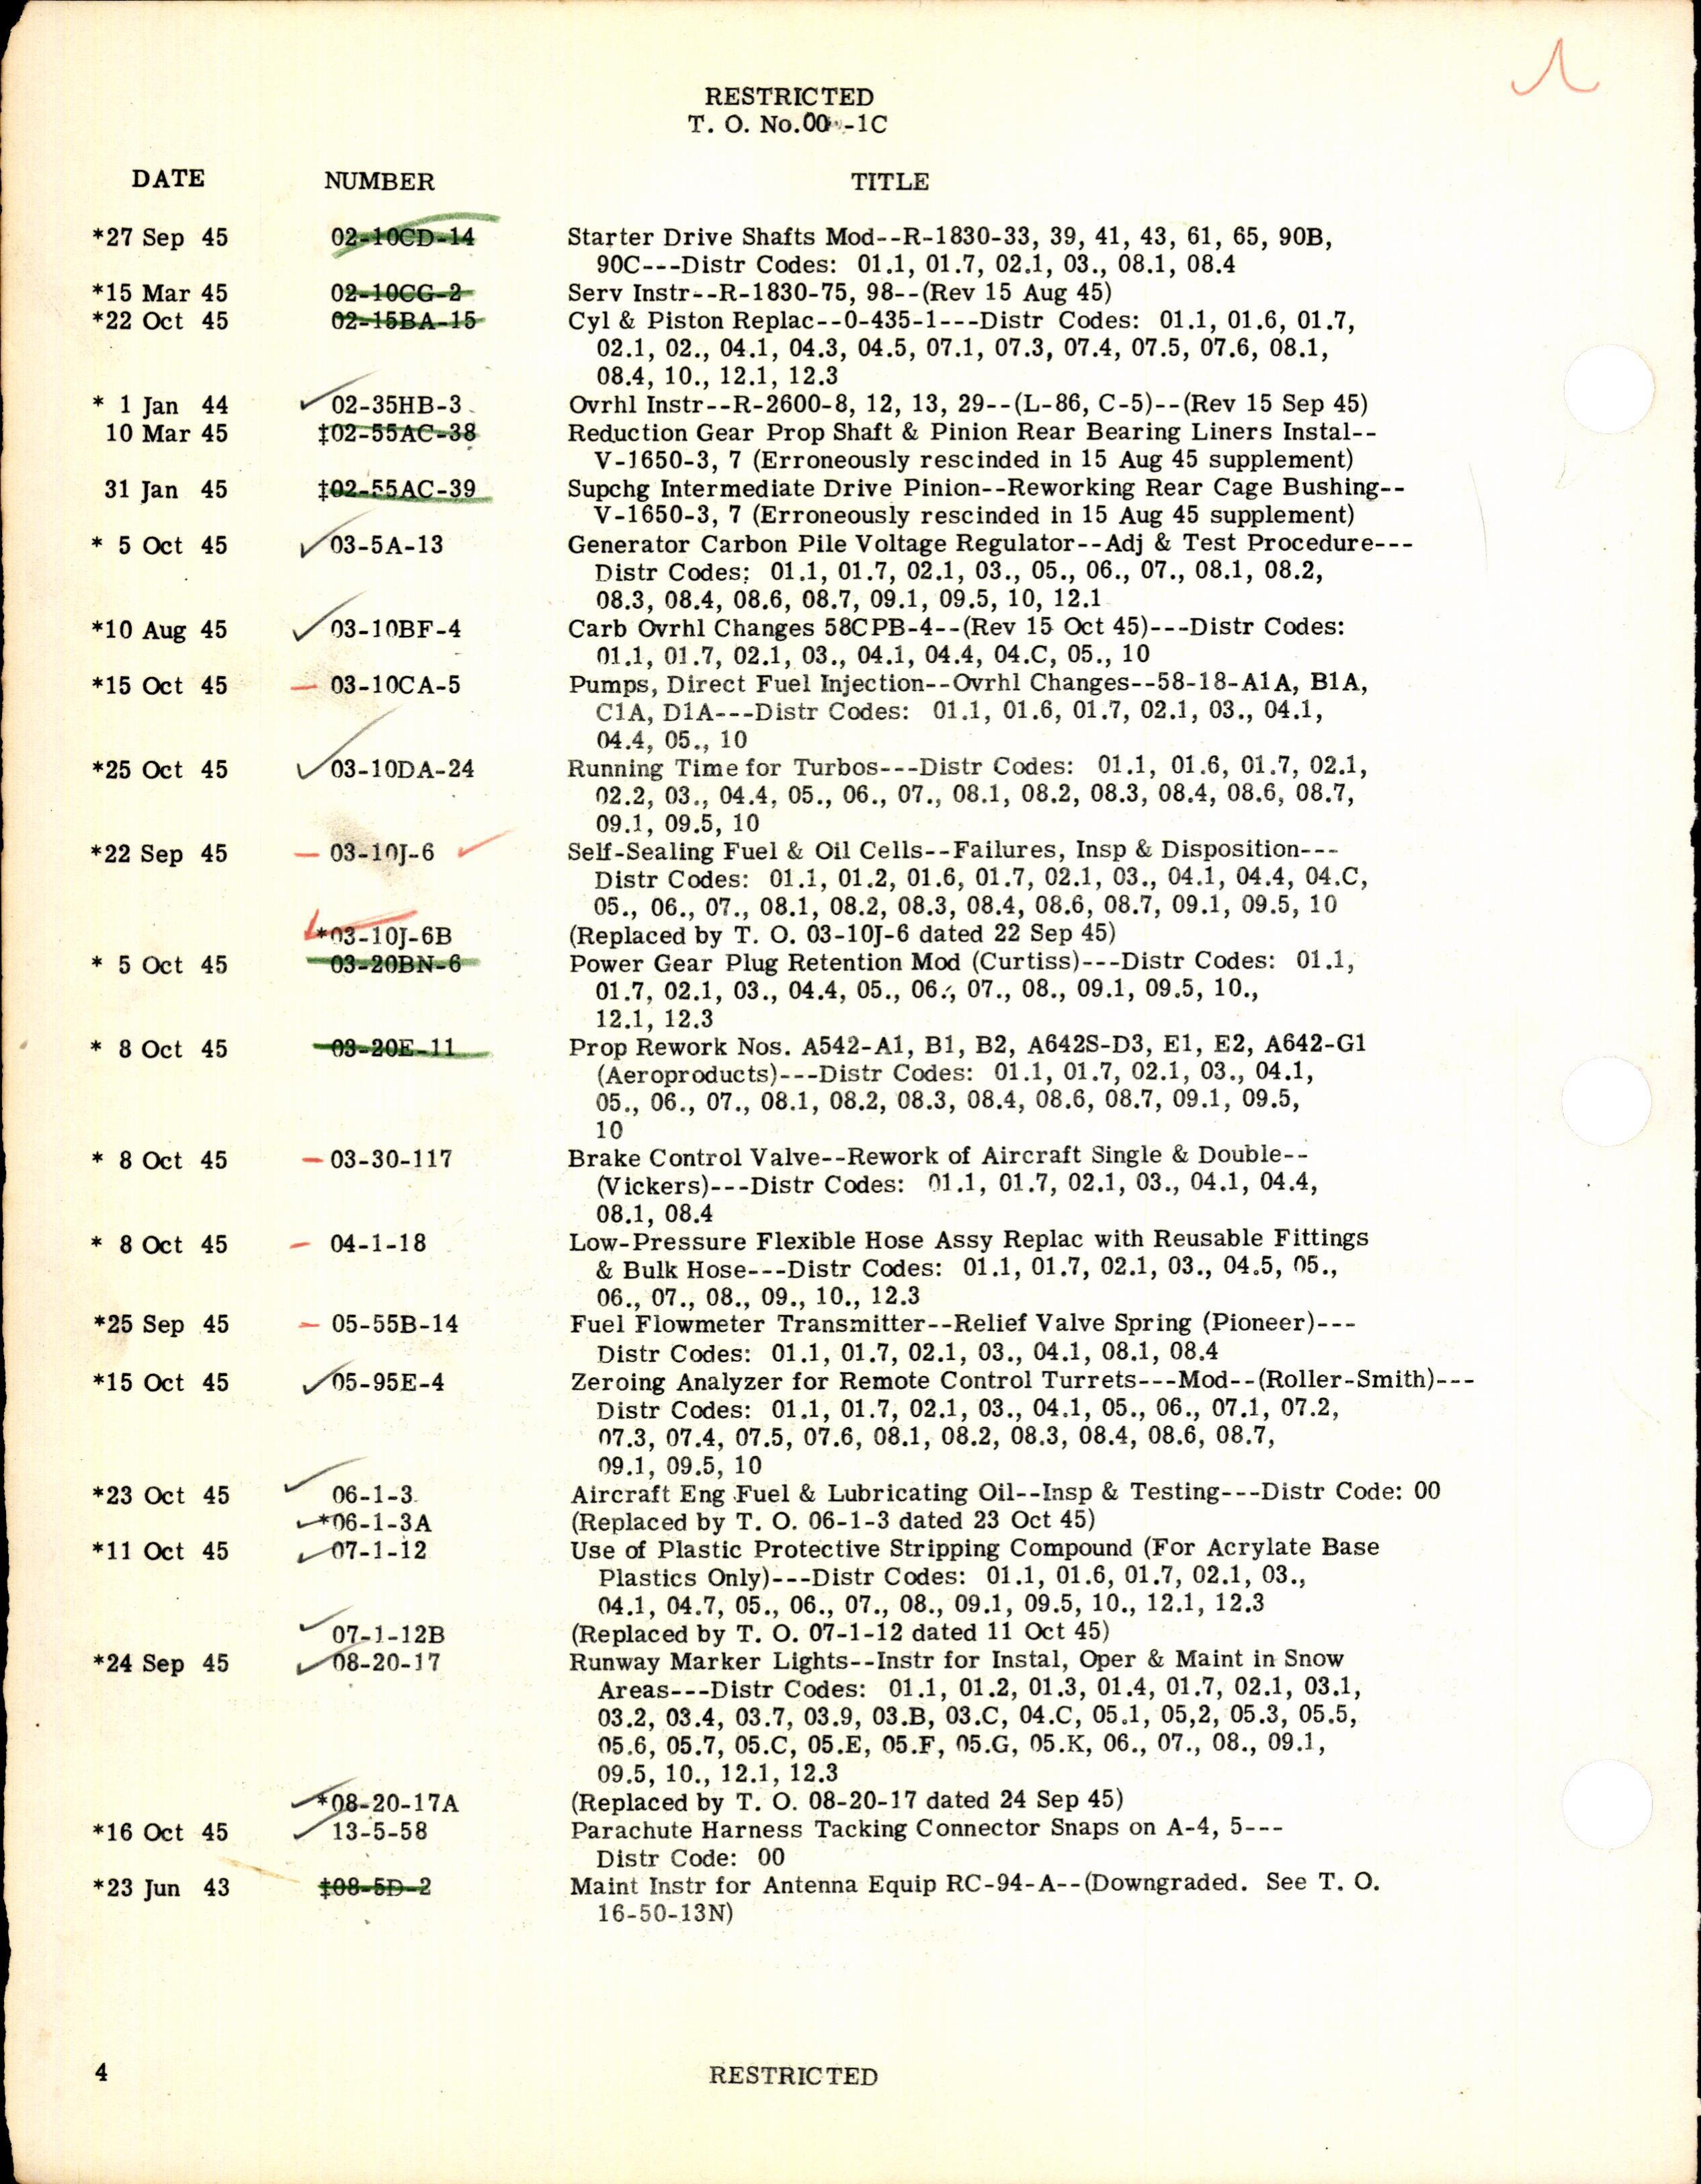 Sample page 4 from AirCorps Library document: Numerical Index of Technical Publications